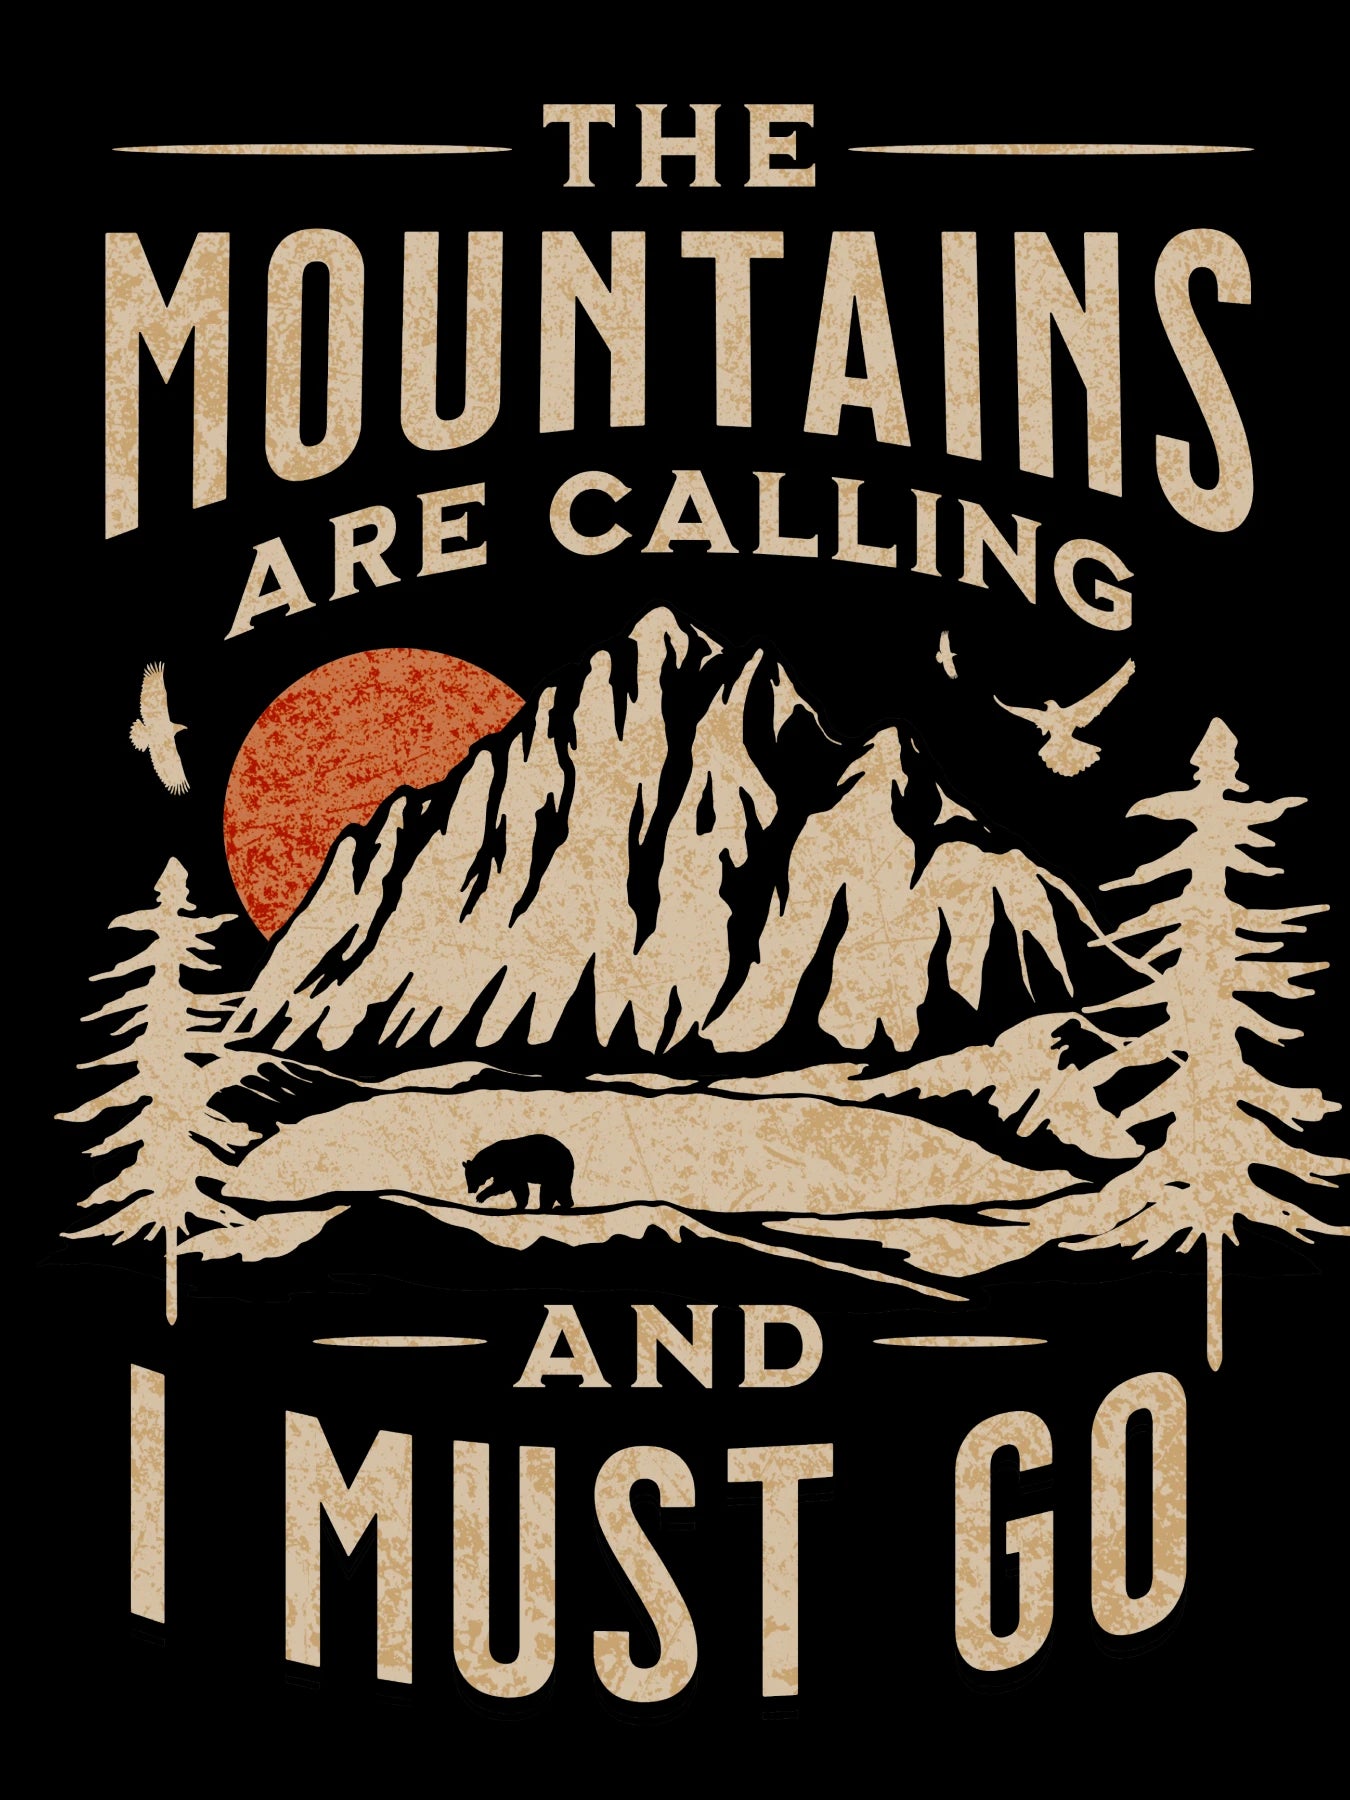 The Mountains Are Calling - Unisex T-Shirt